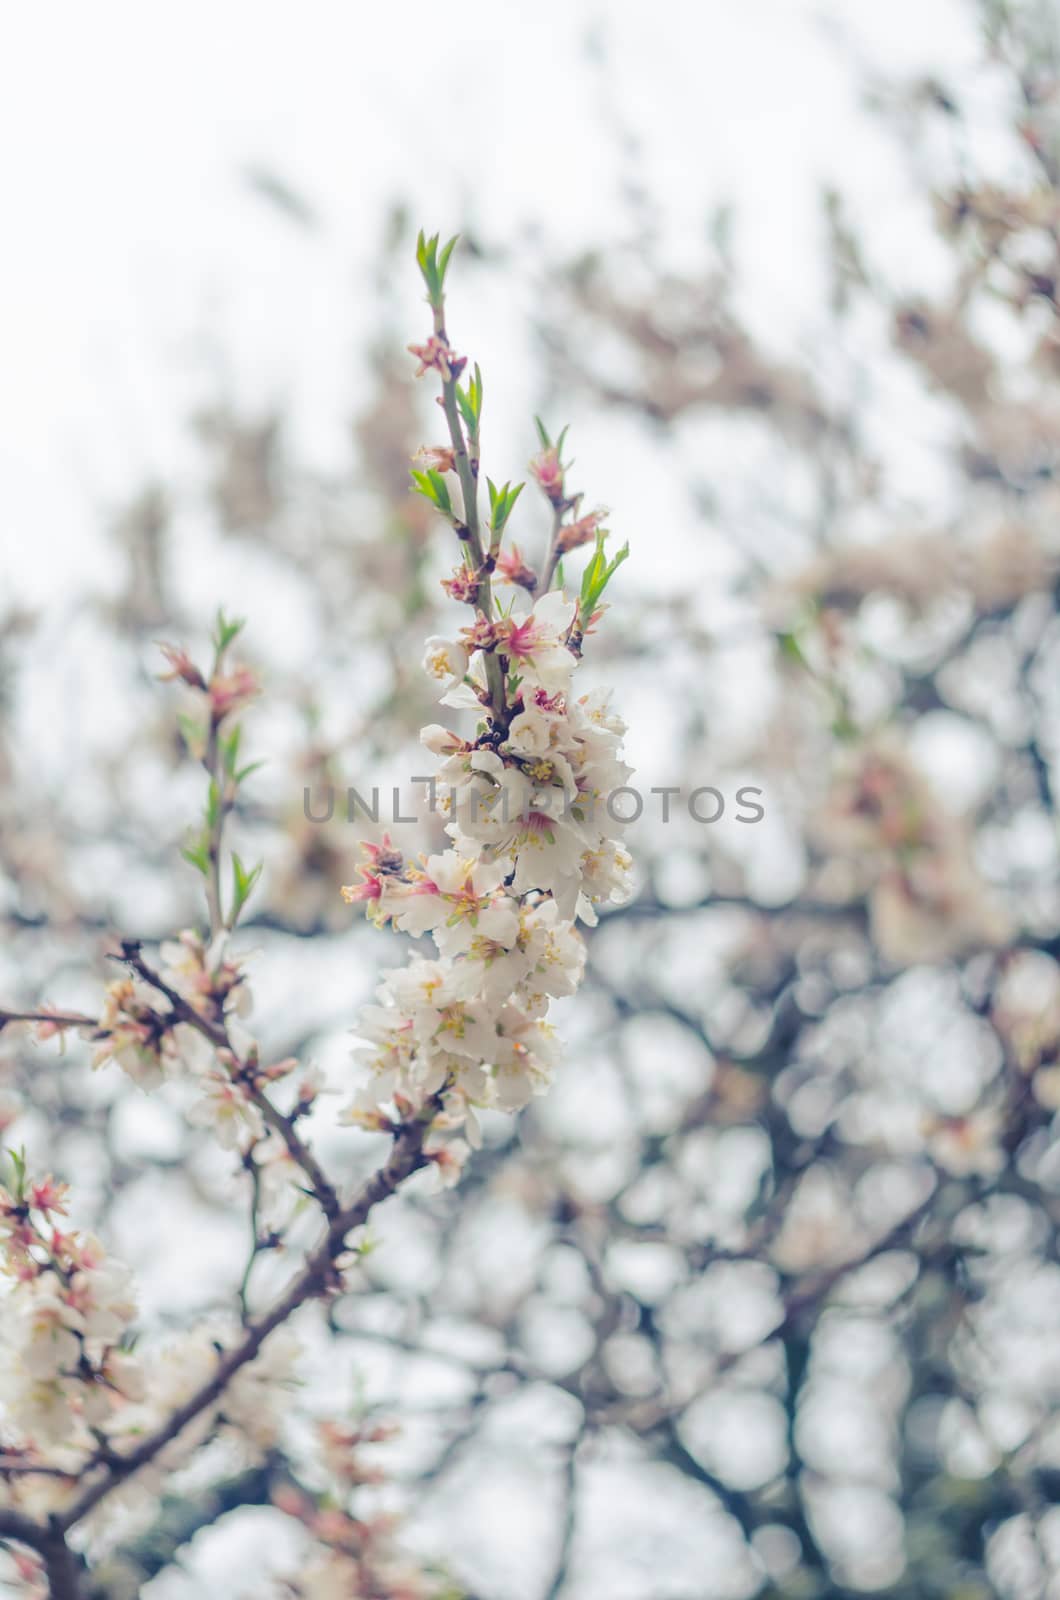 Cheery blossom flowers on spring day. Beauty flowers by goody460